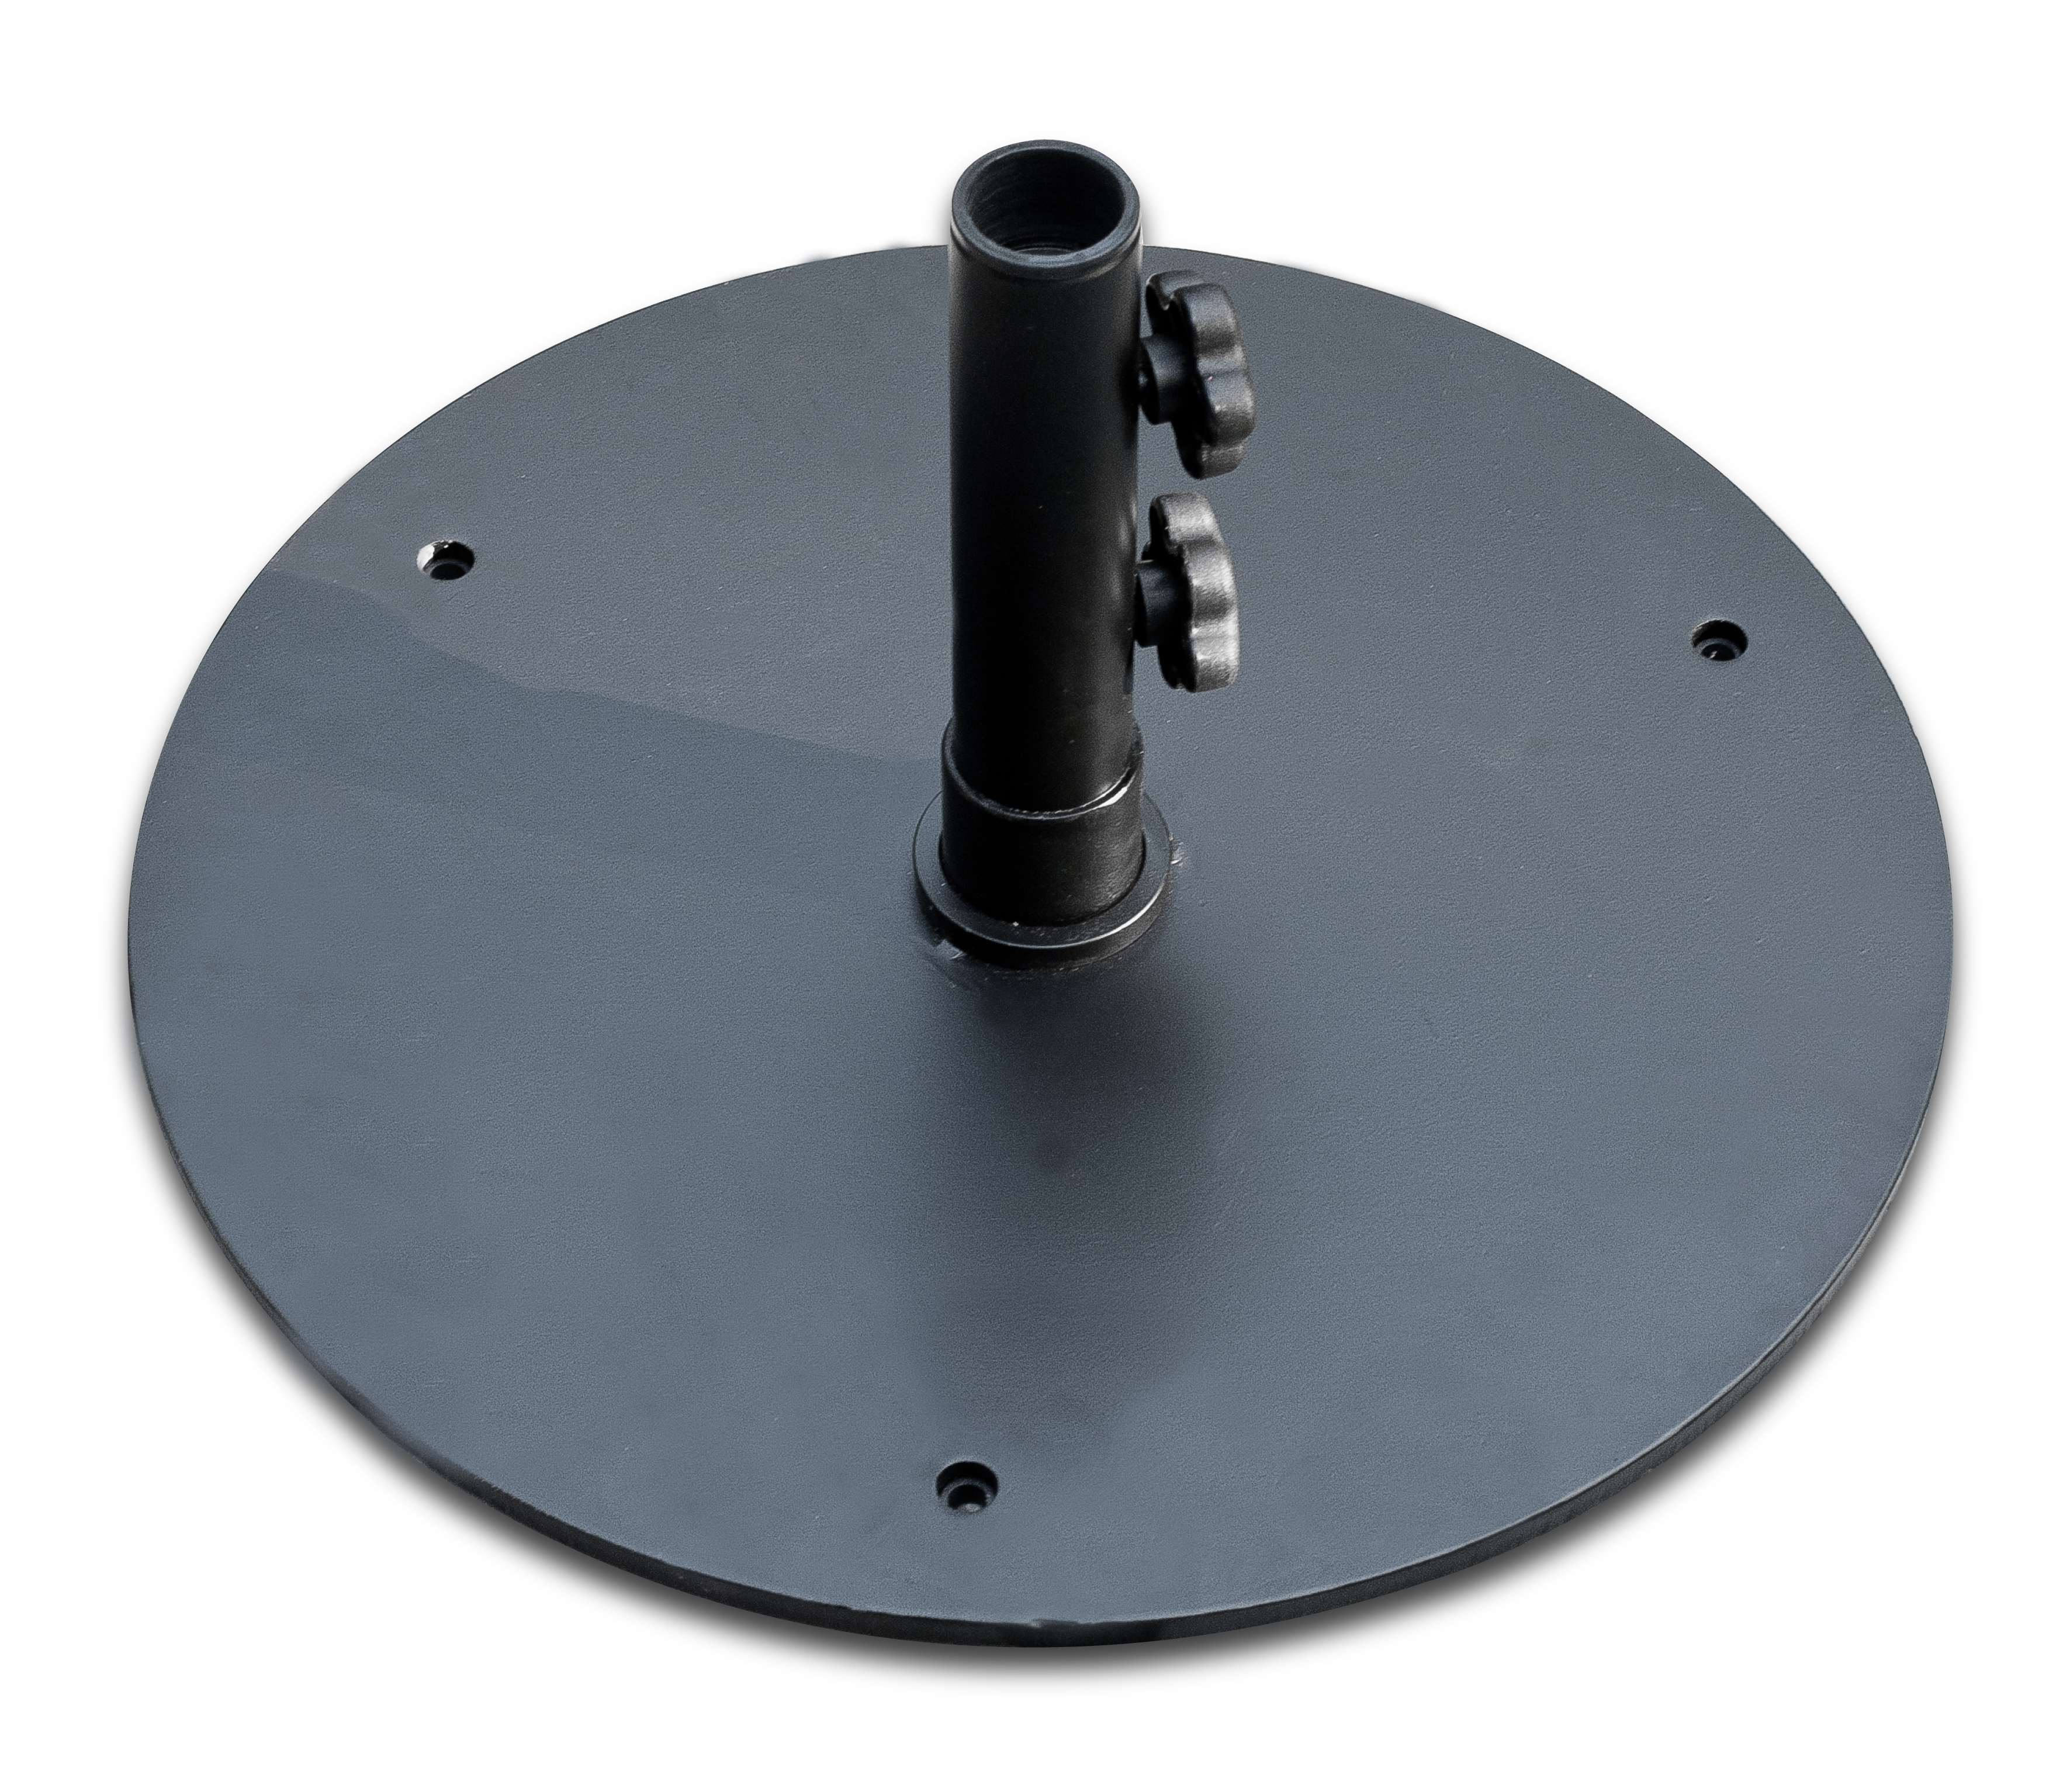 Steel Base 50lb –  Matte Black, White, Bronze, or Silver
$139.00
Click Here to See Spec Sheet
